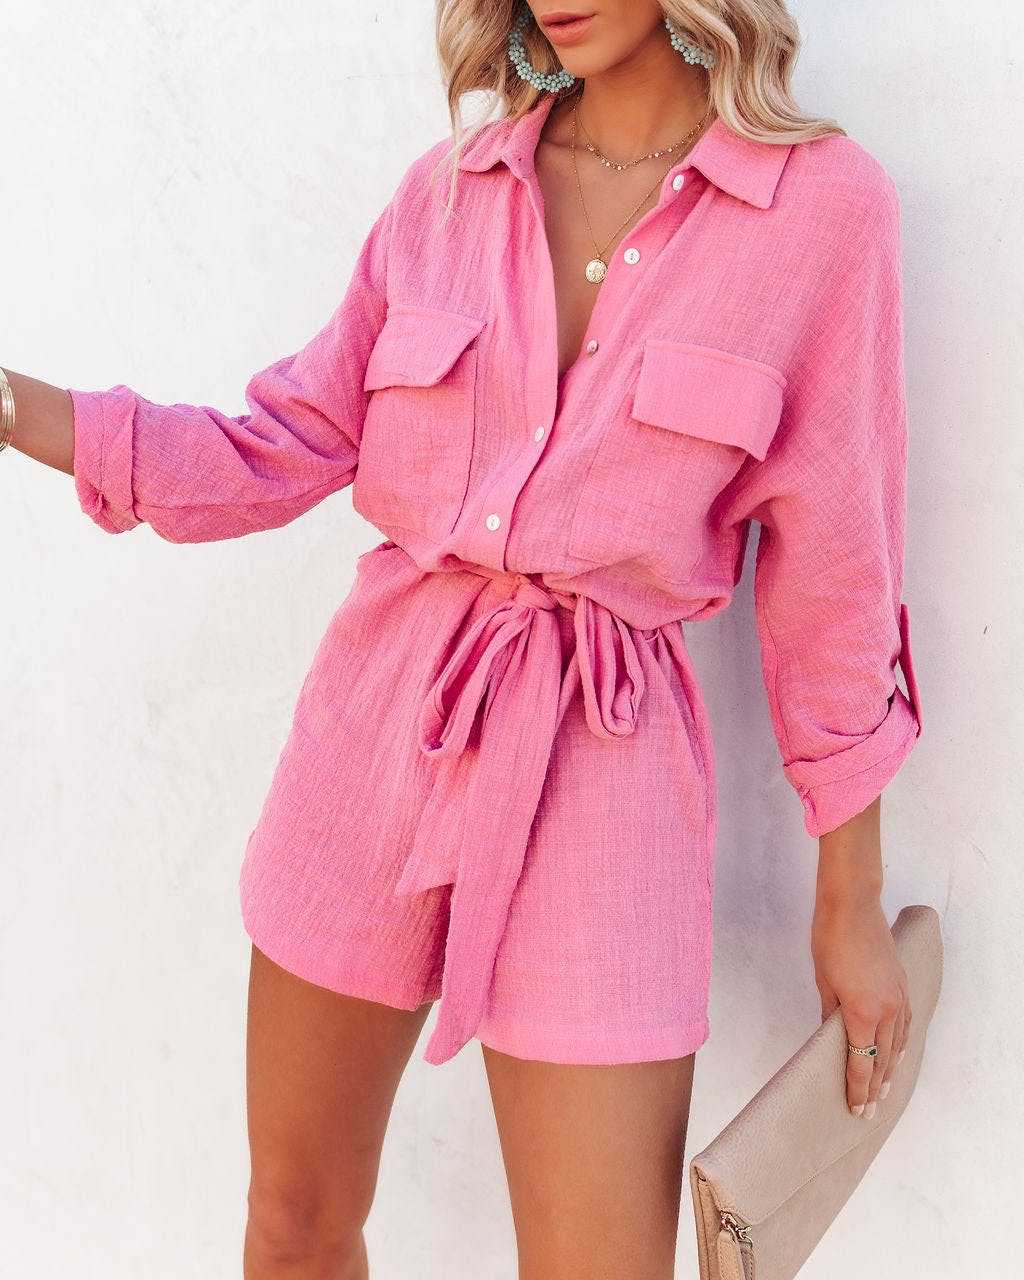 Cotton Mid-Waist Casual Romper Dress - rompers - malbusaat.co.uk